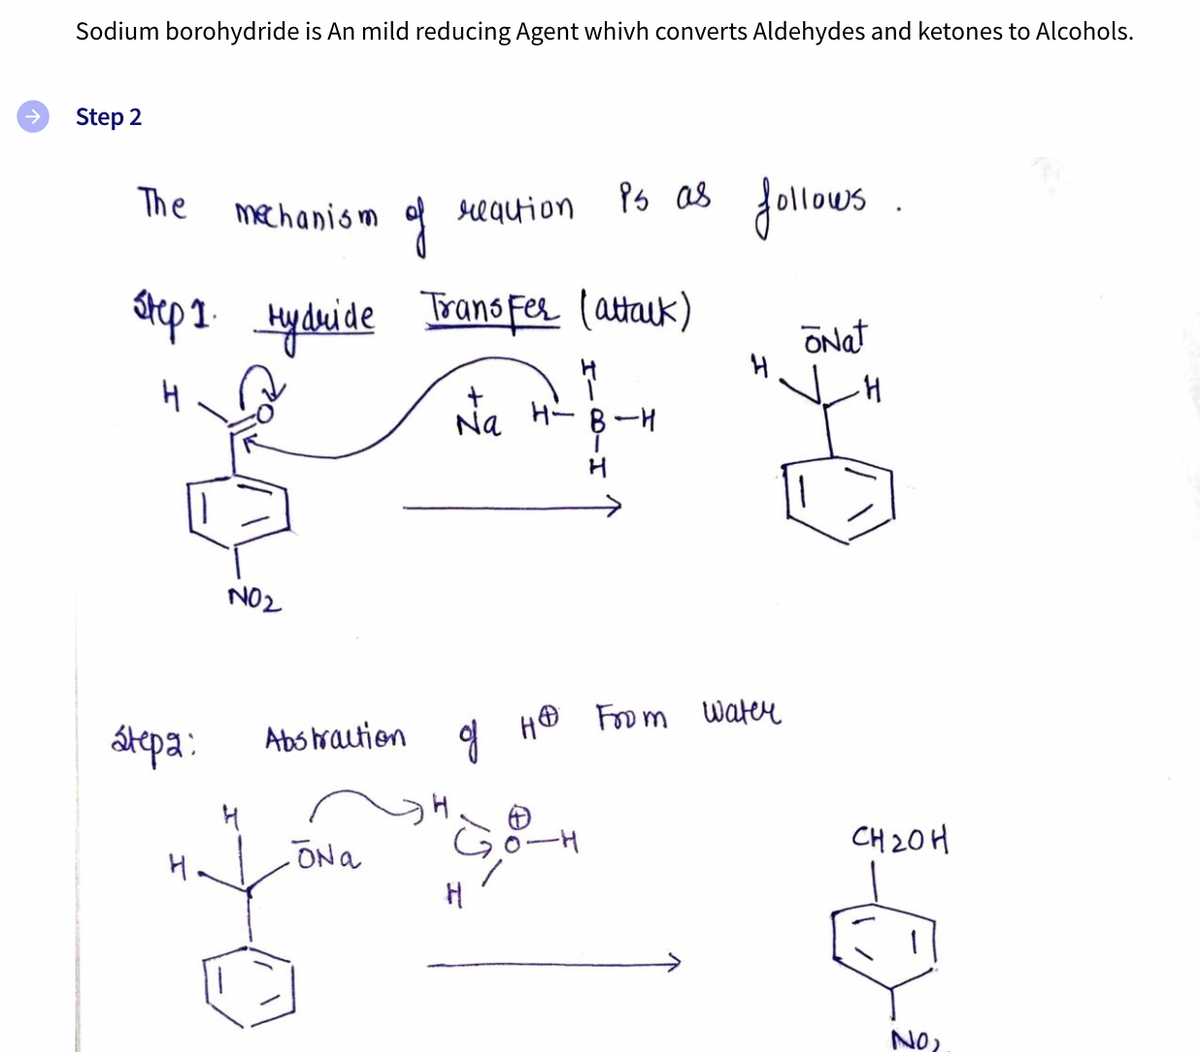 9 H® From water
Sodium borohydride is An mild reducing Agent whivh converts Aldehydes and ketones to Alcohols.
Step 2
Ps as .
Jollous
The
mechanism
requion
atep1 Hyduide
Trans Fer (attauk)
ONat
Na
H- B-H
H
->
NO2
átepa:
Abs hraution
CH 20H
H.
ONa
NO?
130
